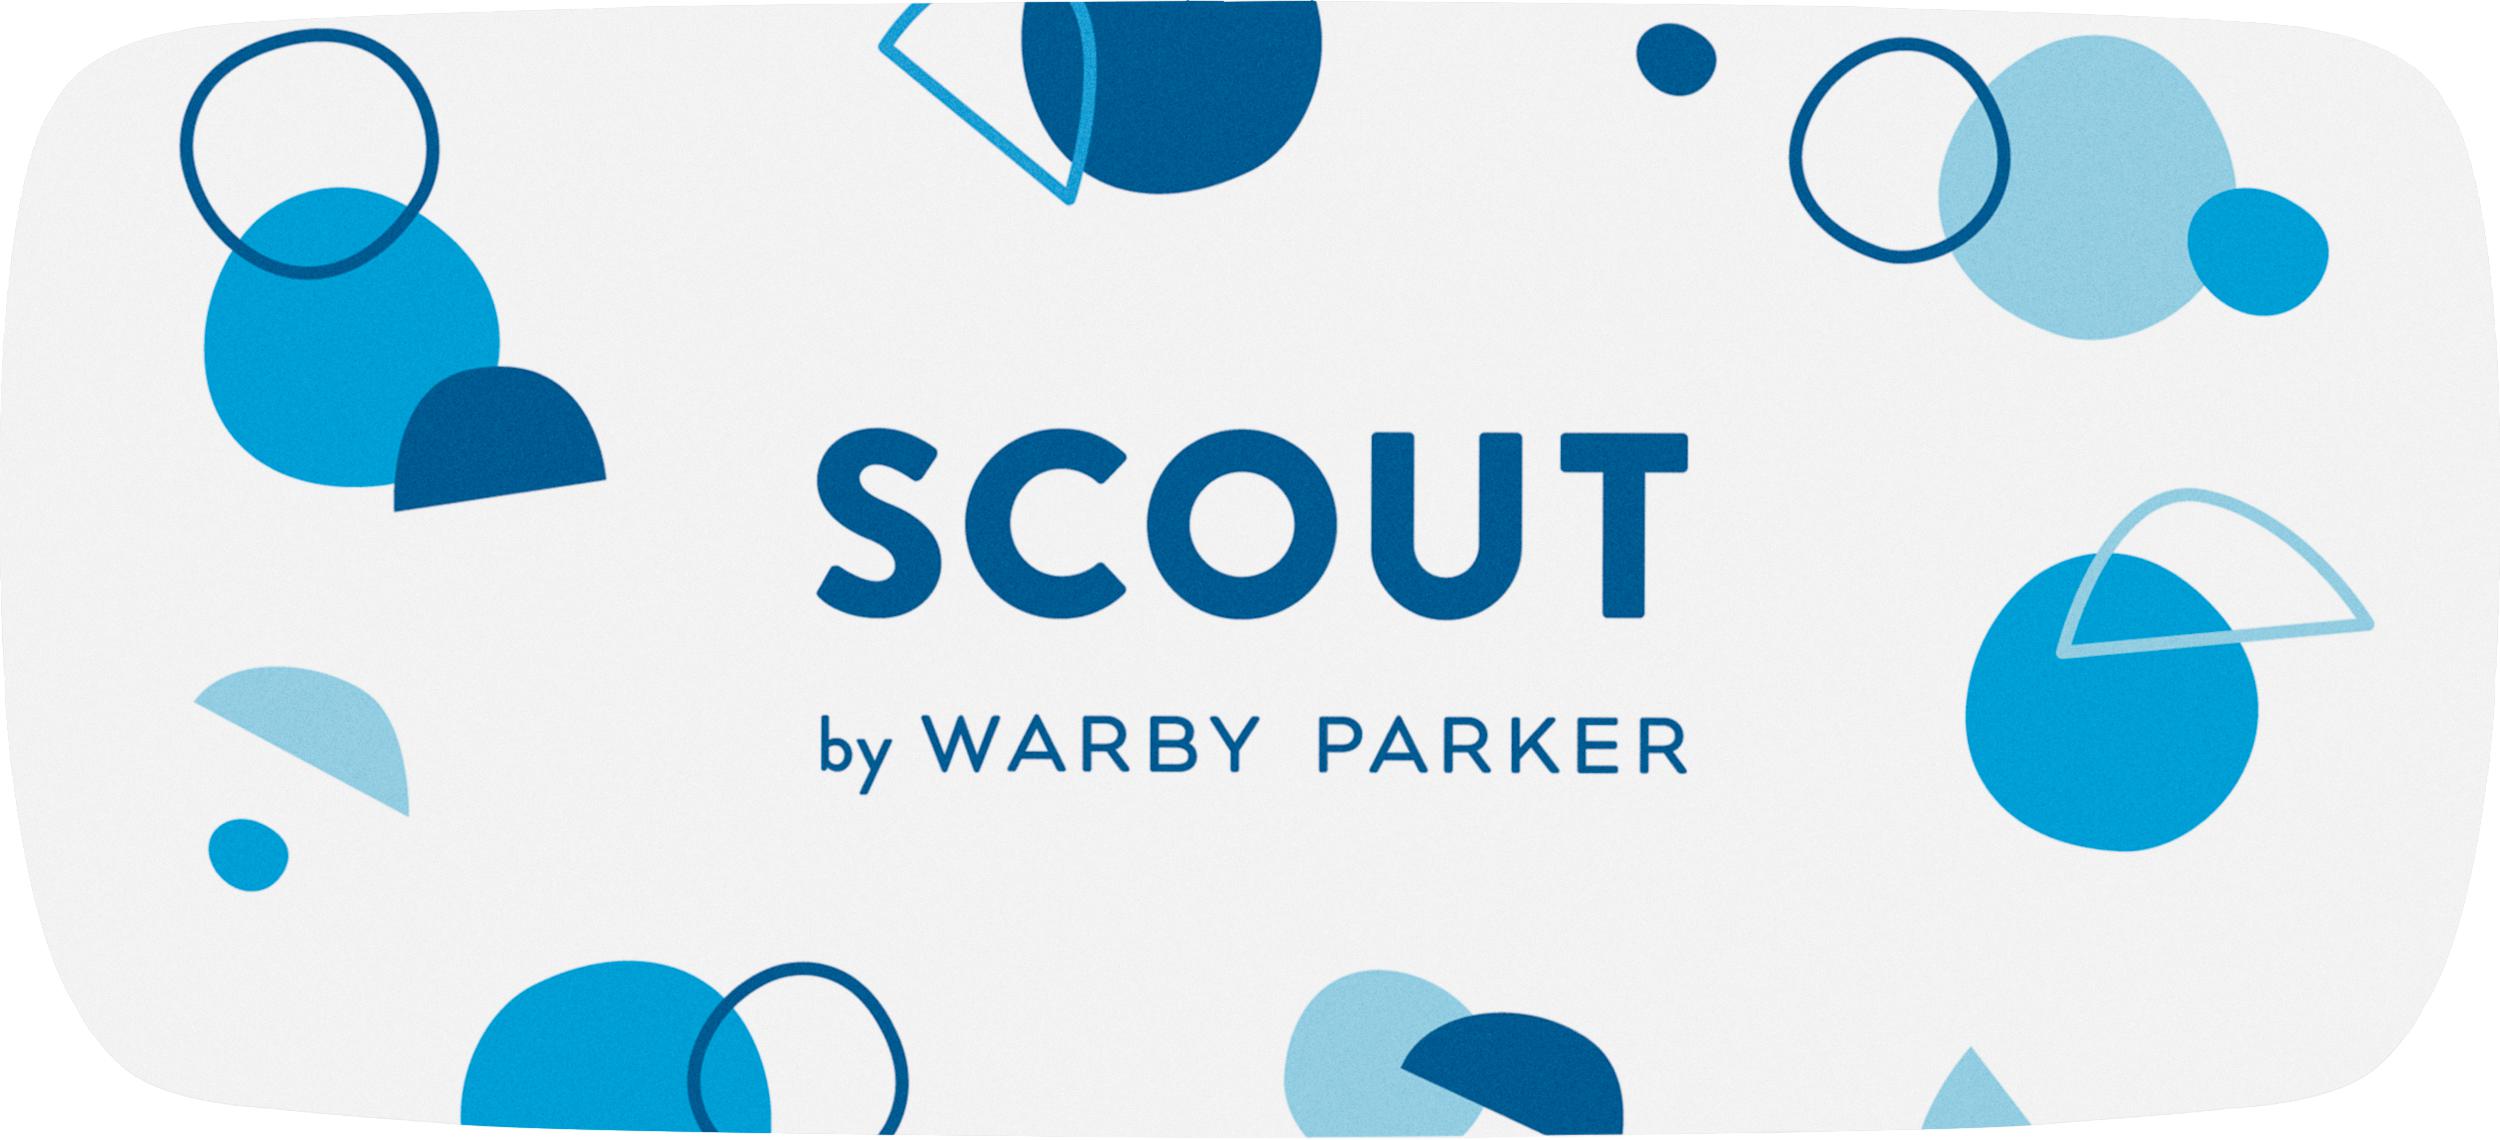 Scout by Warby Parker